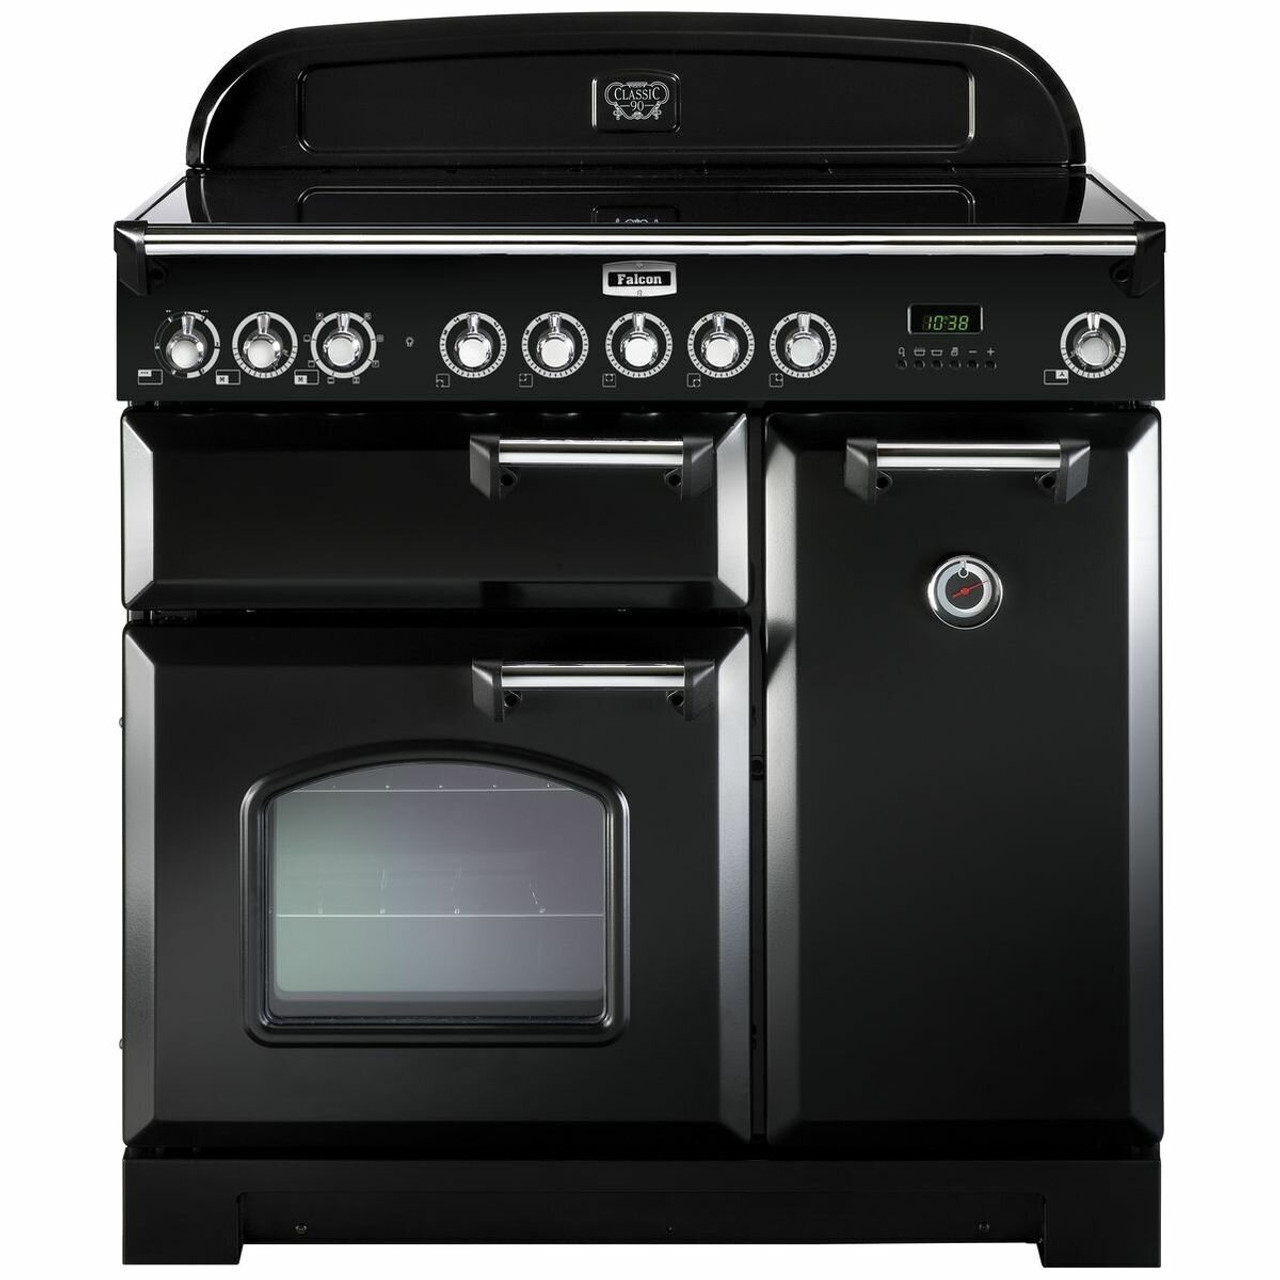 CDL90EIBLCH - Classic Deluxe 90cm Freestanding Induction Oven/Stove - Black